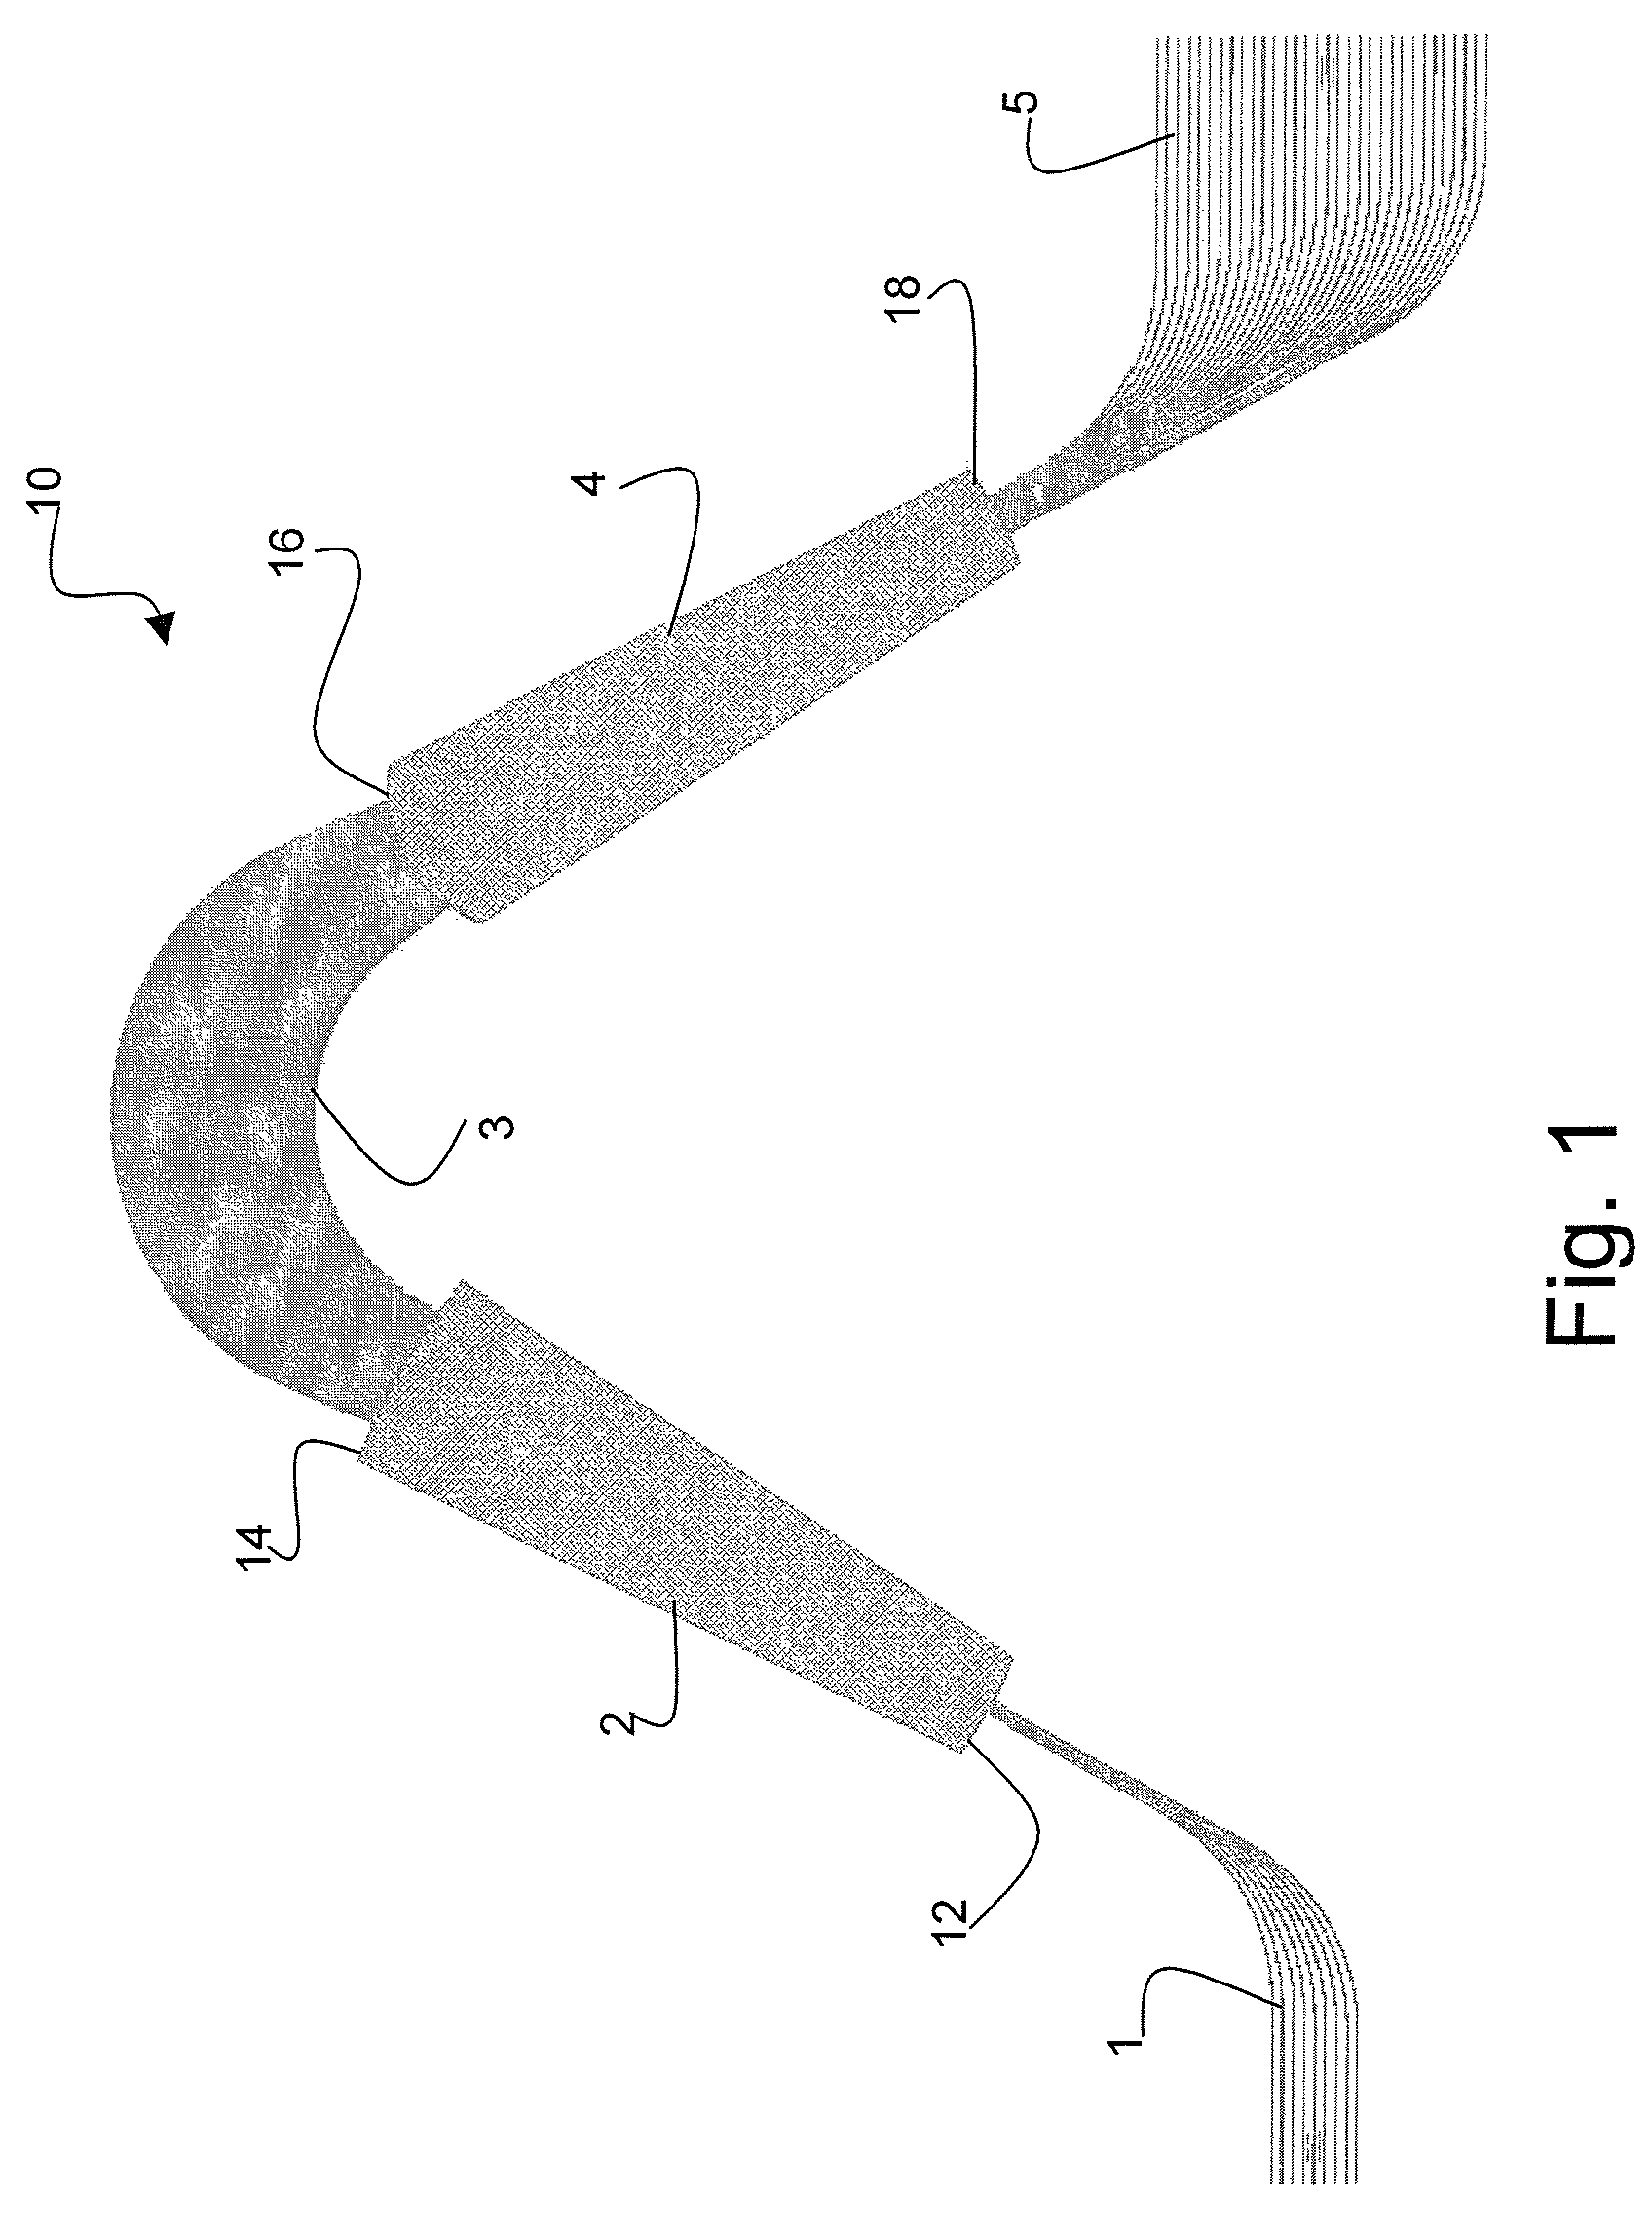 Phase matched optical grating